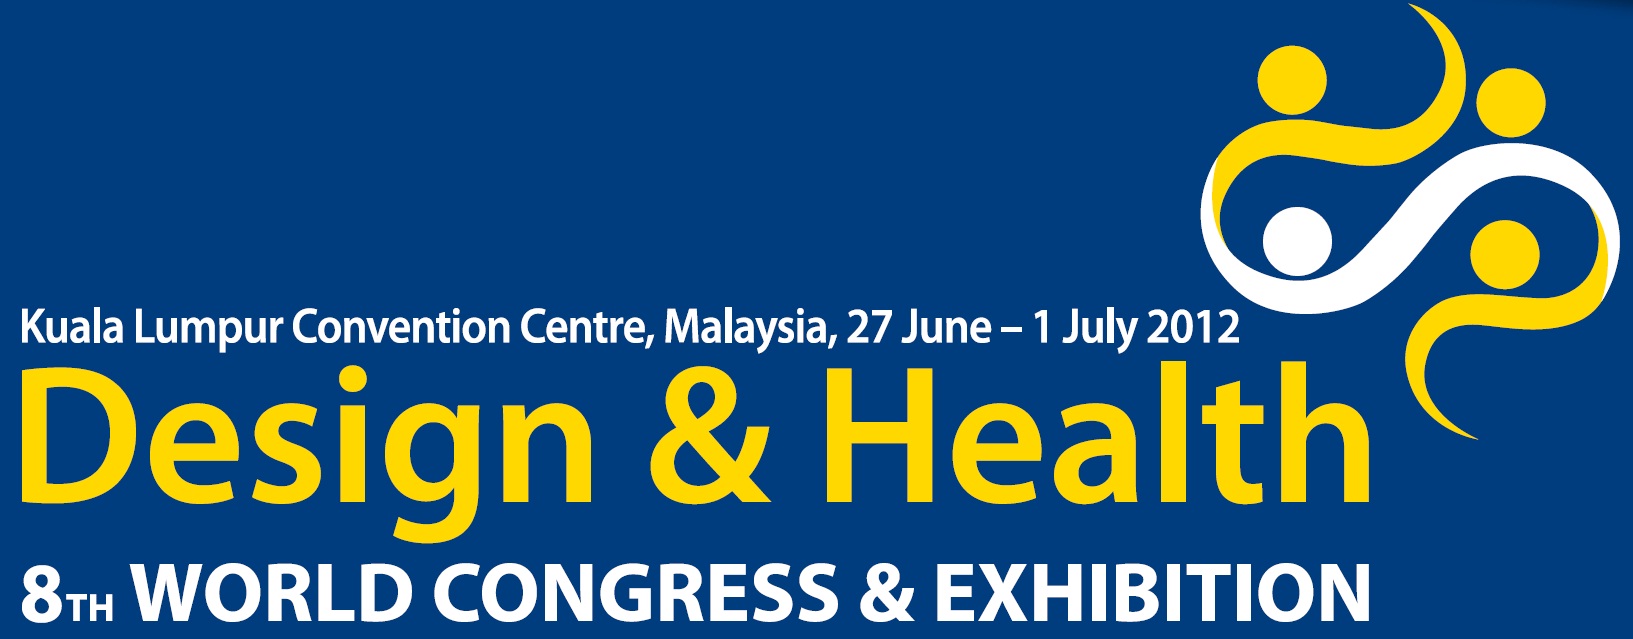 The 8th World Congress on Design & Health in 